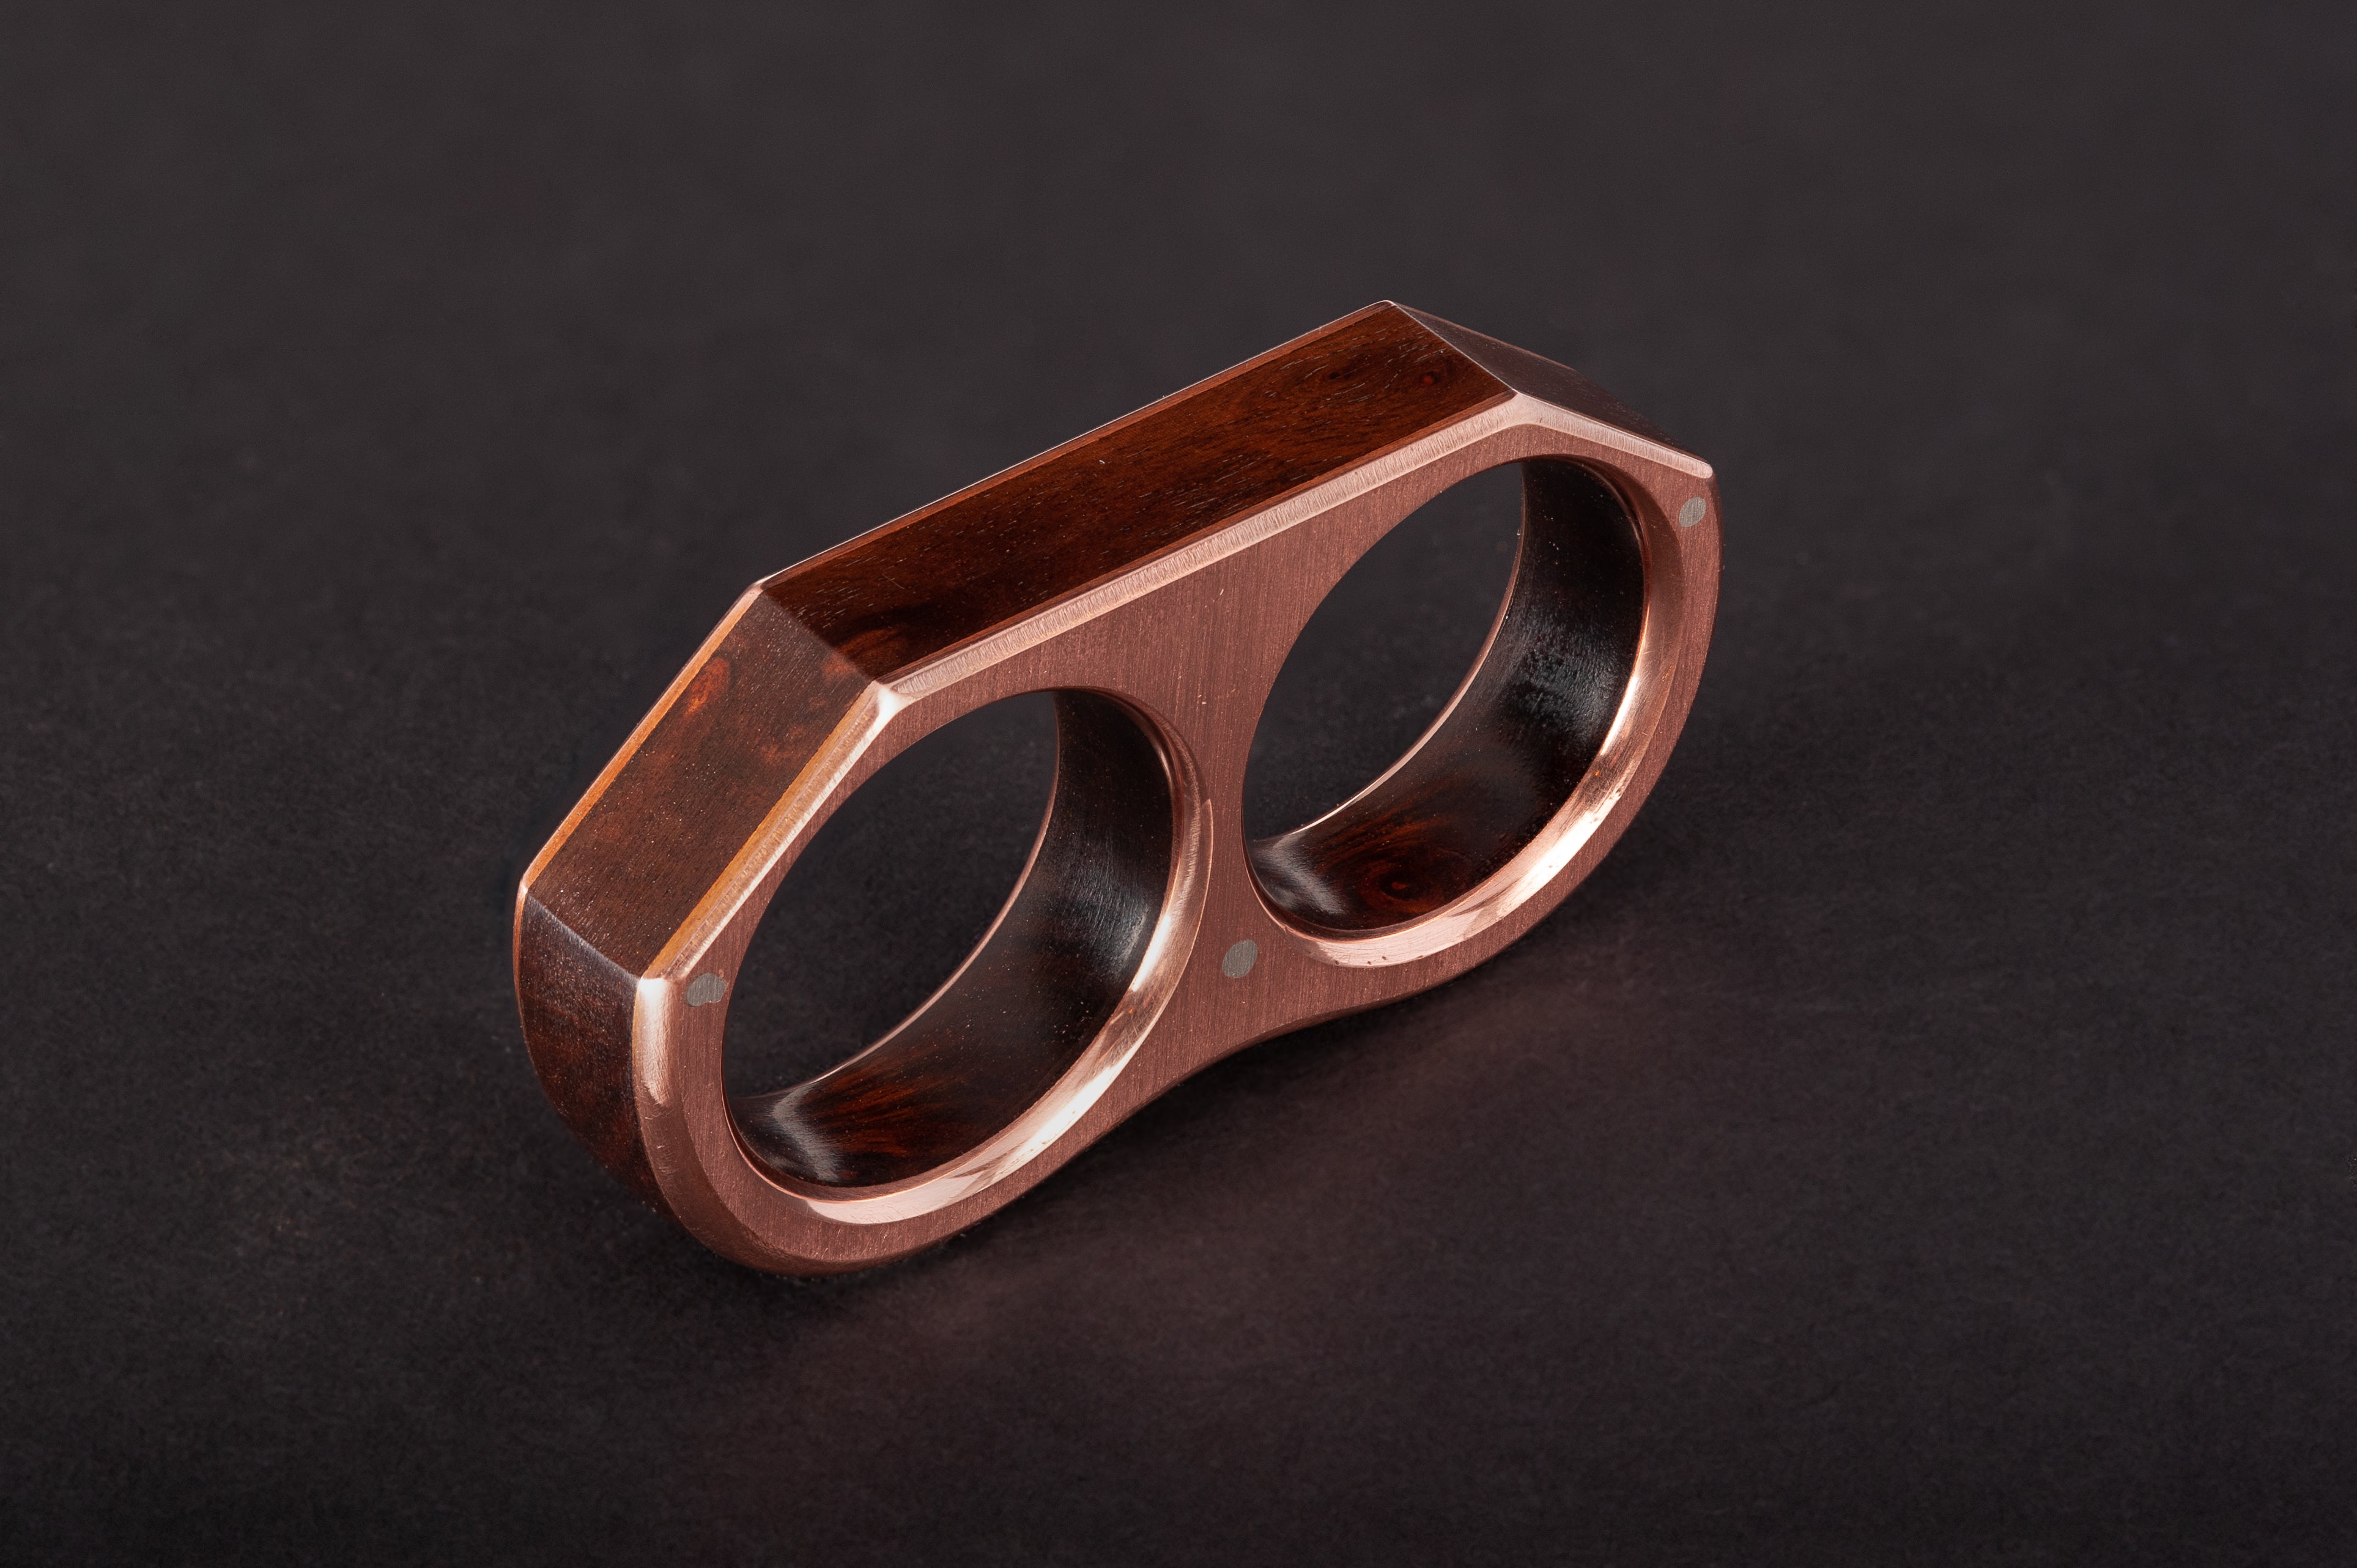 Buy S.G.U. Hand Made Copper Ring or Copper Health Beneficial Simple challa Finger  Ring for Puja Purpose (Set of 2) Online at Low Prices in India - Amazon.in